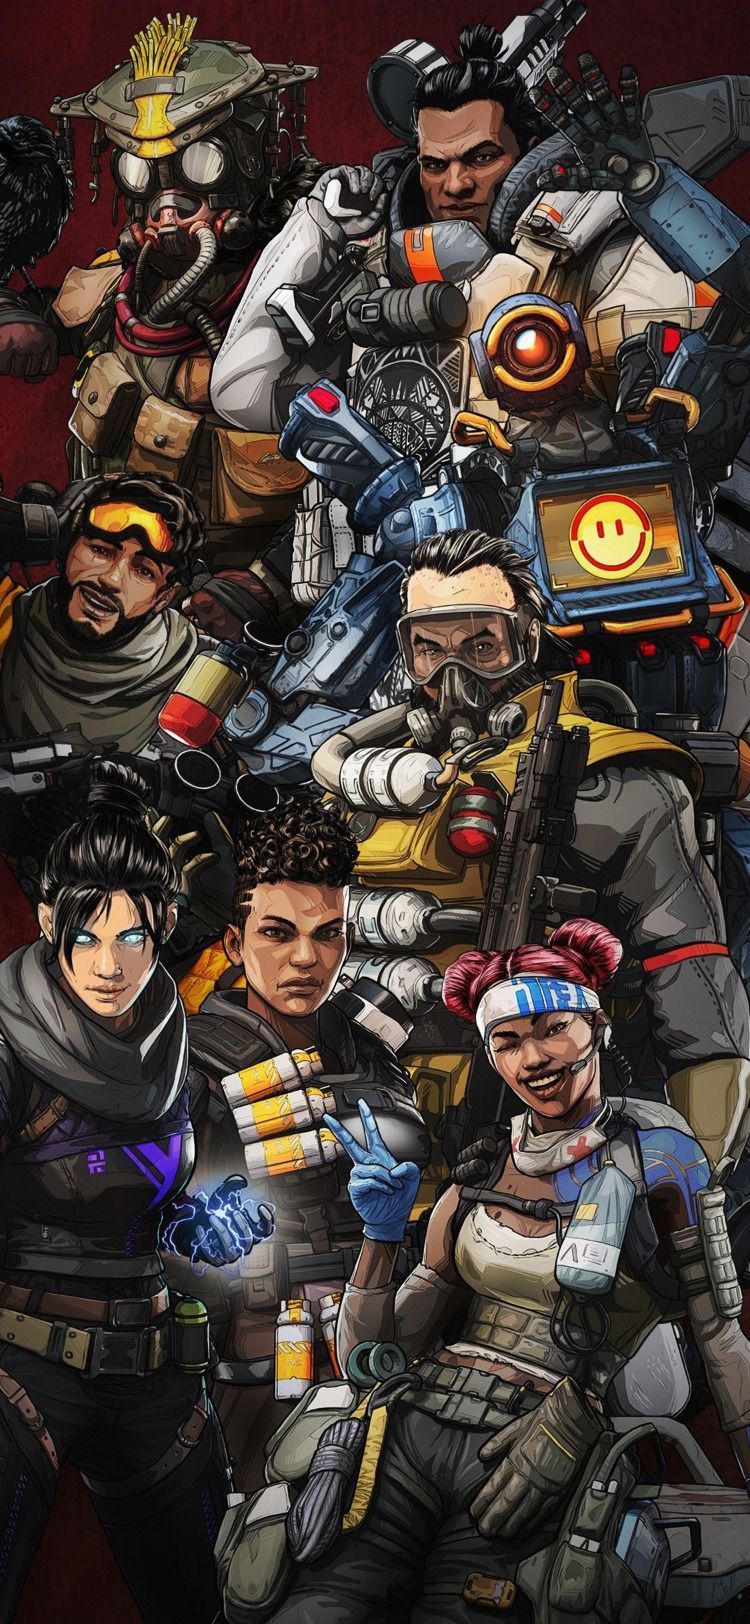 Dead Games in 2023: Apex Legends Mobile, Battlefield Mobile, and More That Were Killed Is Just First Month of the Year